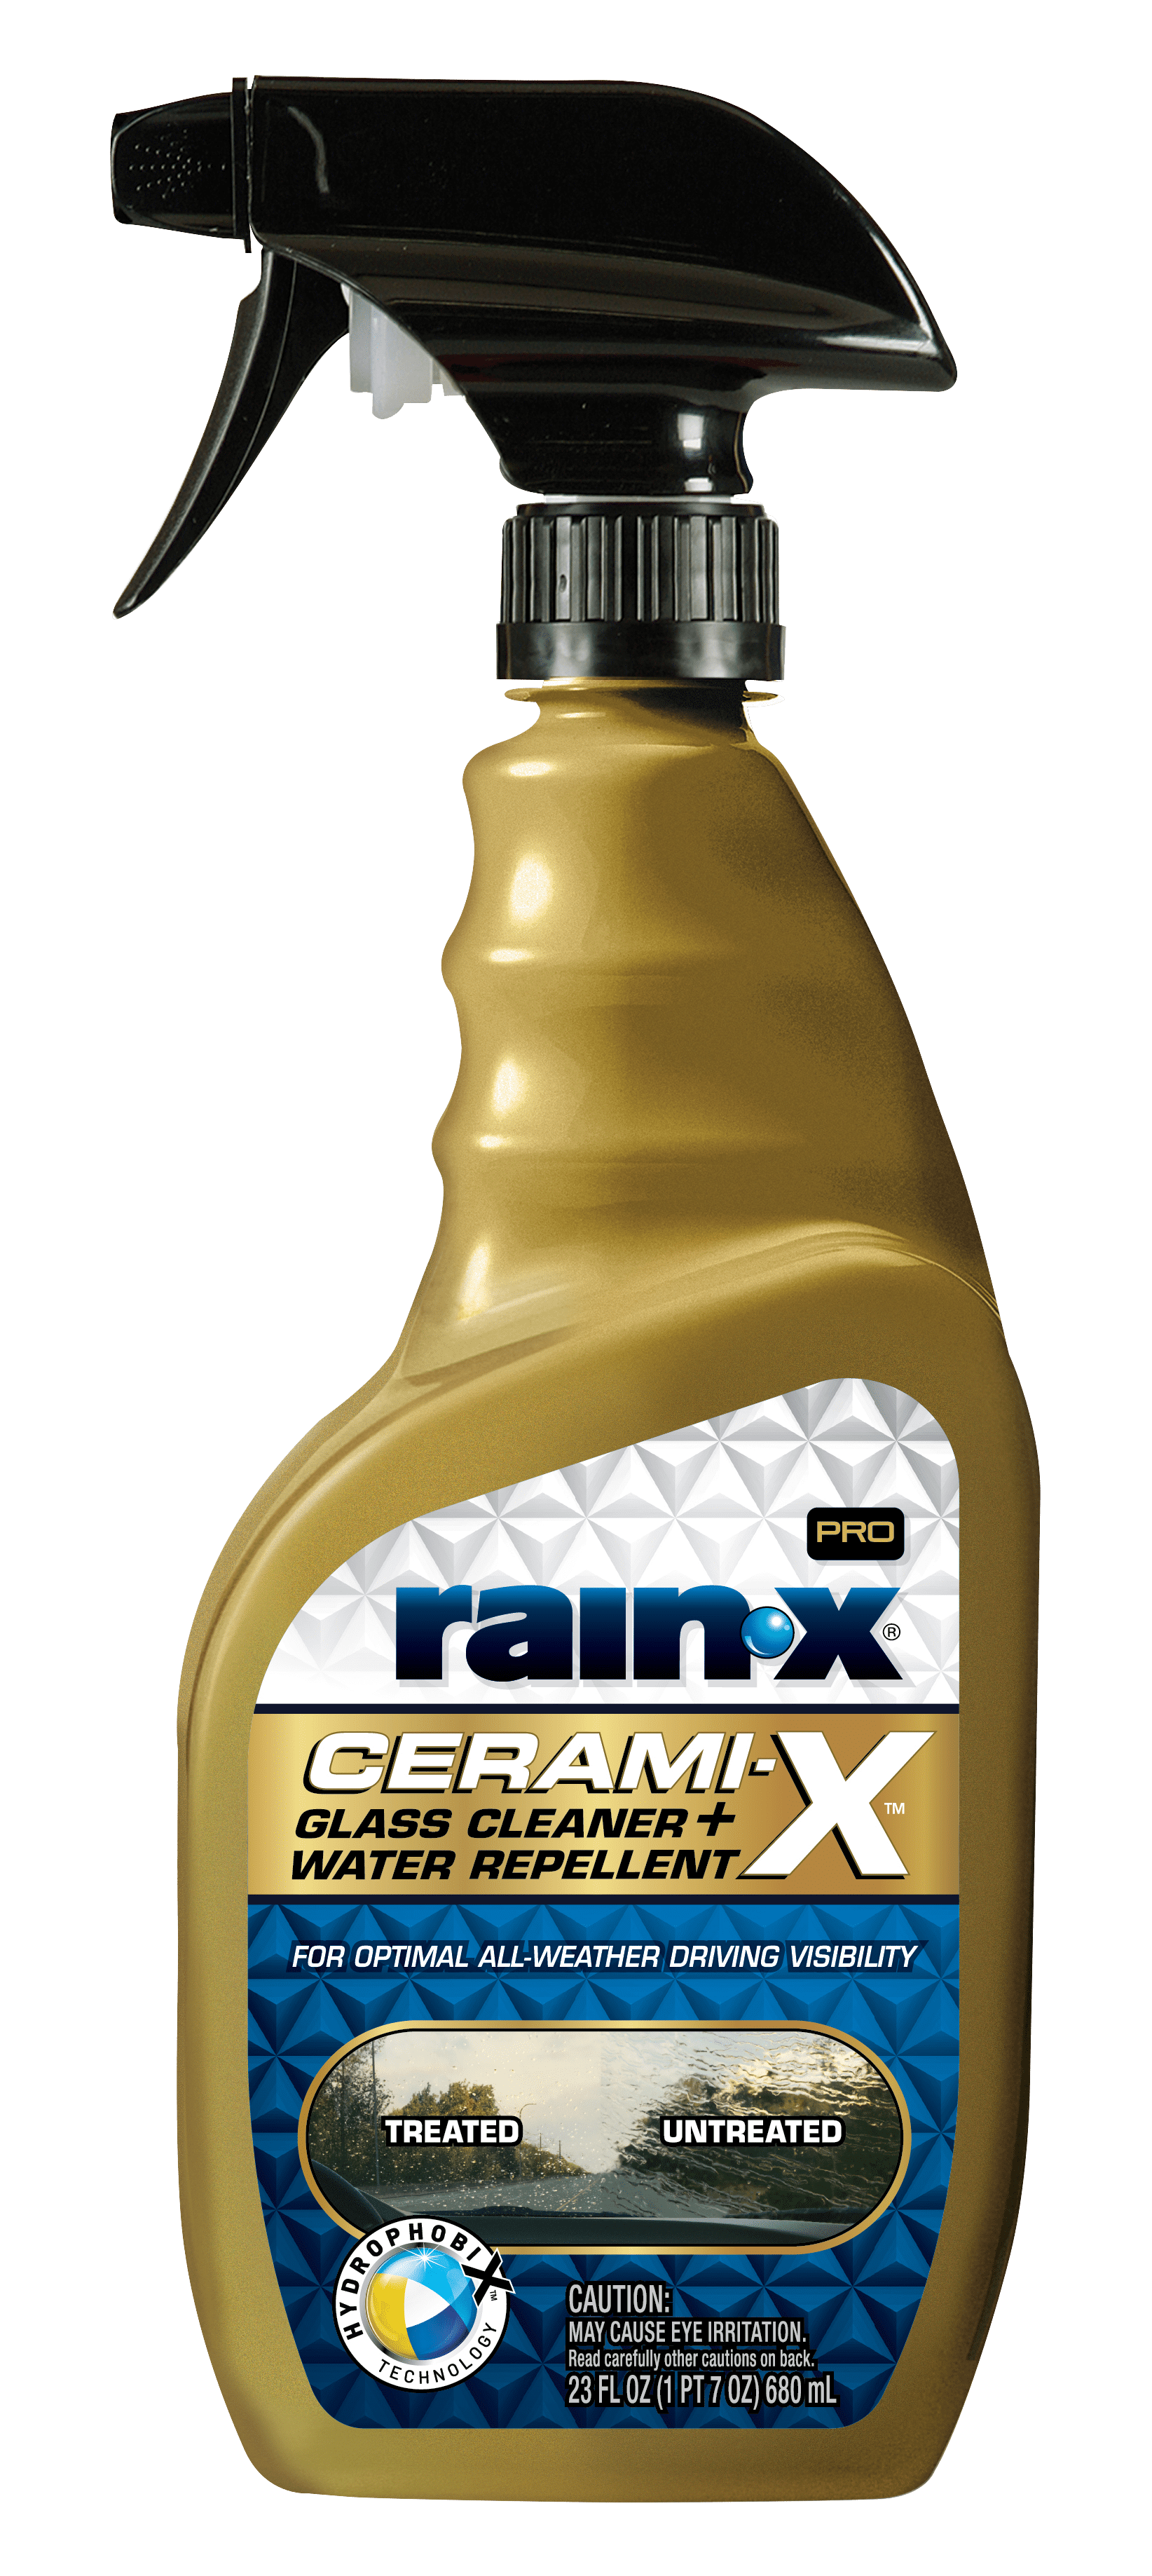 Rain-X Repellent Spray & Glass Cleaner Review 